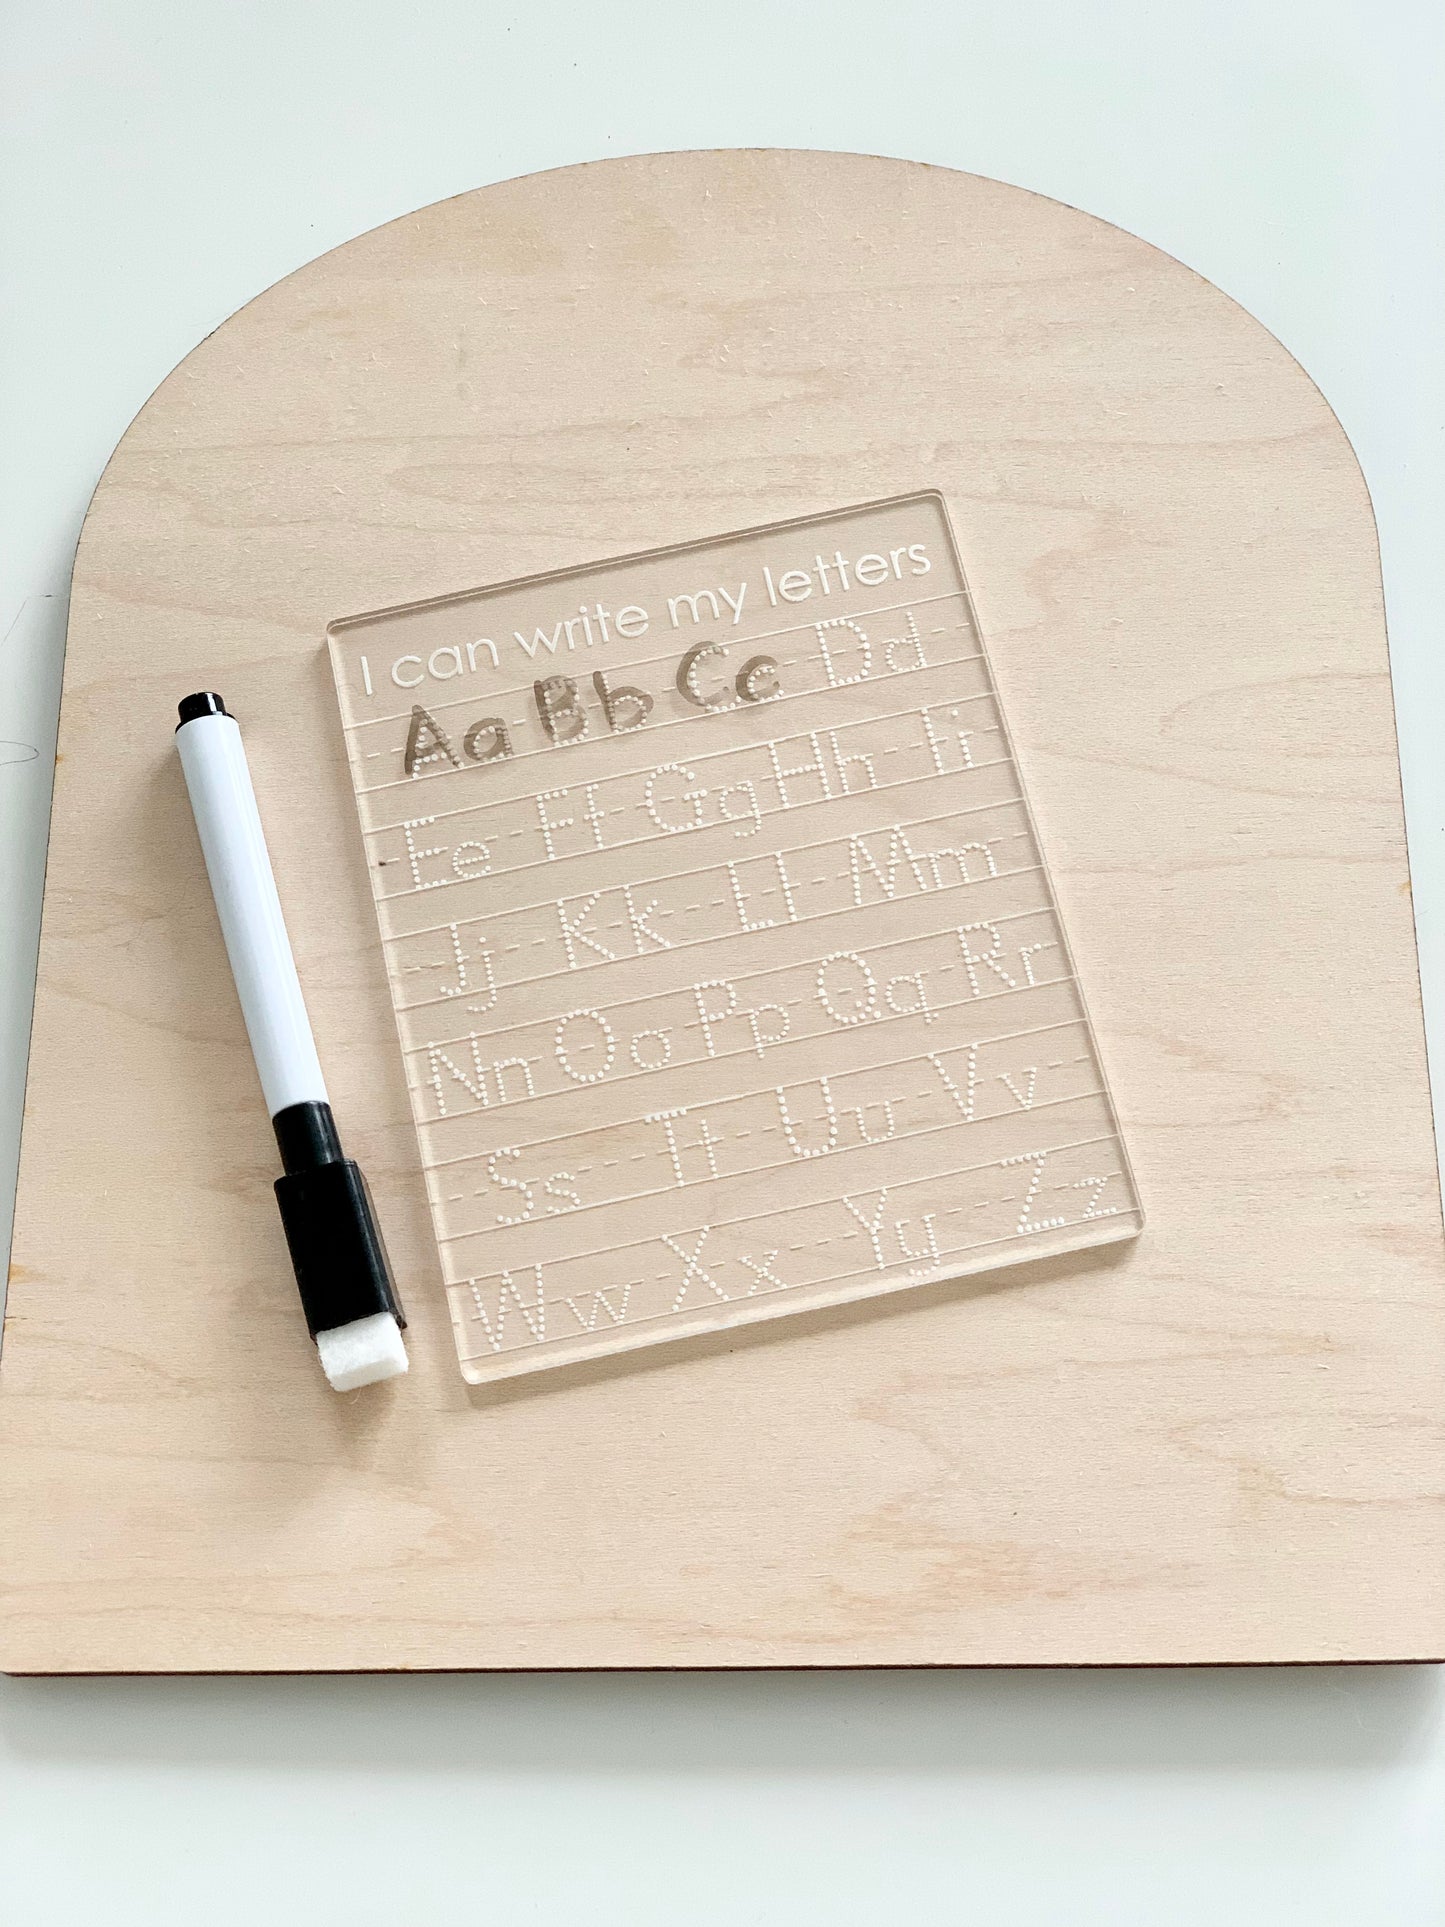 MINI Alphabet Acrylic Dry Erase Tracing Board — I can write my letters